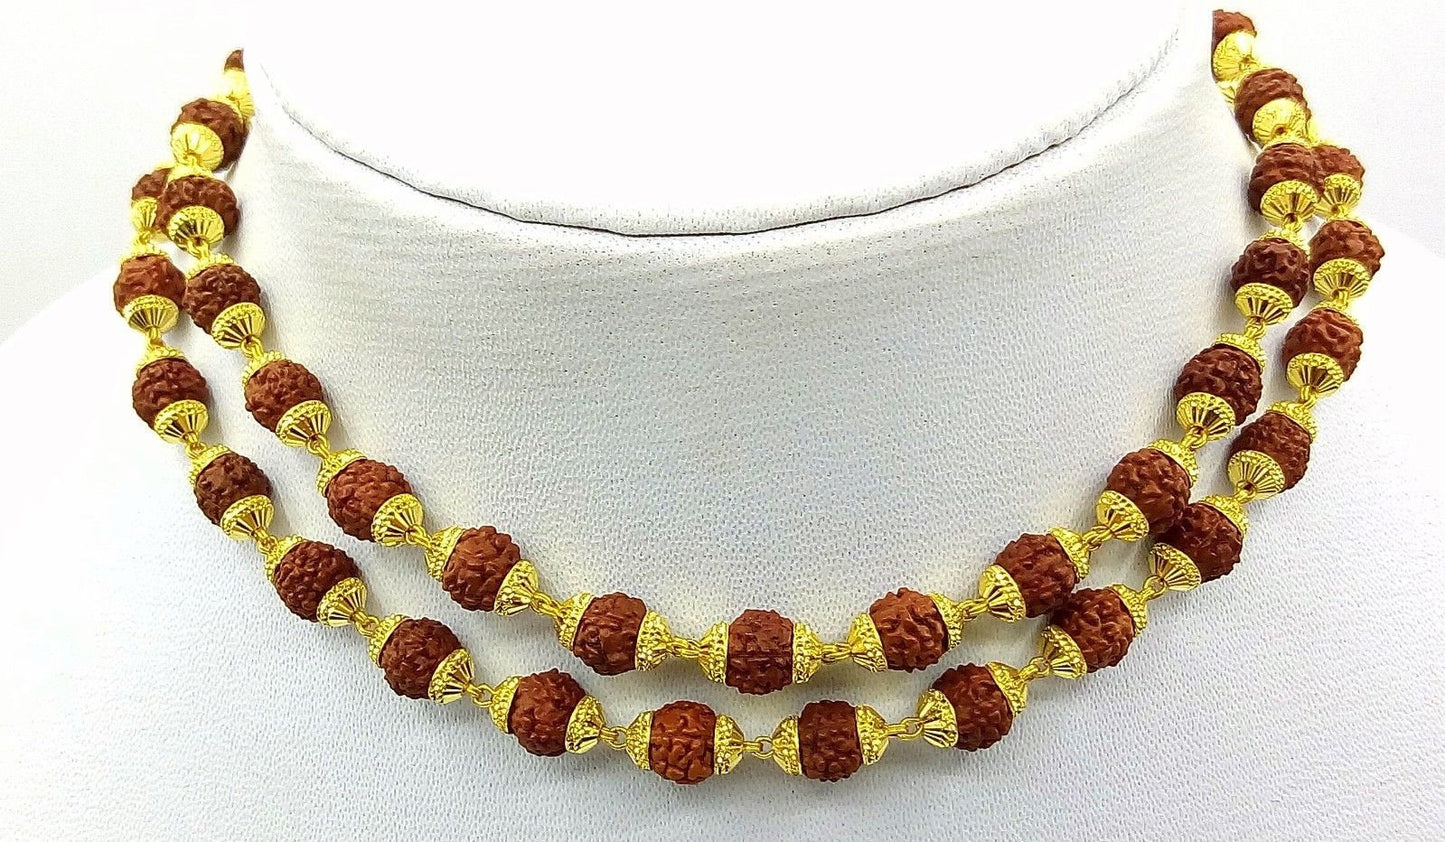 Natural rudraksha 54 bead japp mala certified 22kt yellow gold gorgeous handmade 25 inches  beads chain necklace From rajasthan - TRIBAL ORNAMENTS